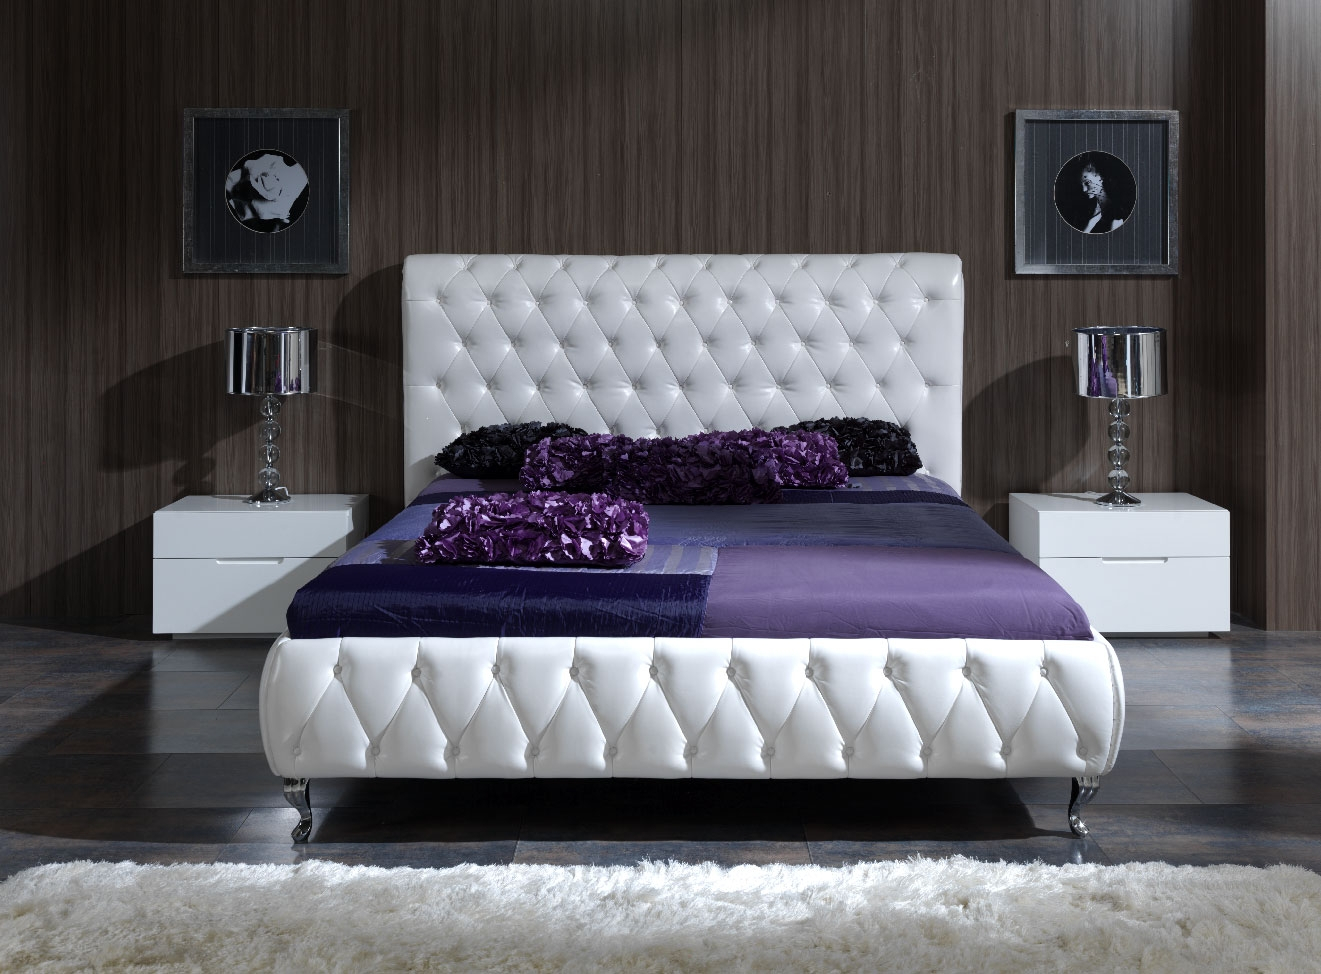 Luxury Modern King Bedroom Sets Andre Charland Home Decorating throughout dimensions 1321 X 974